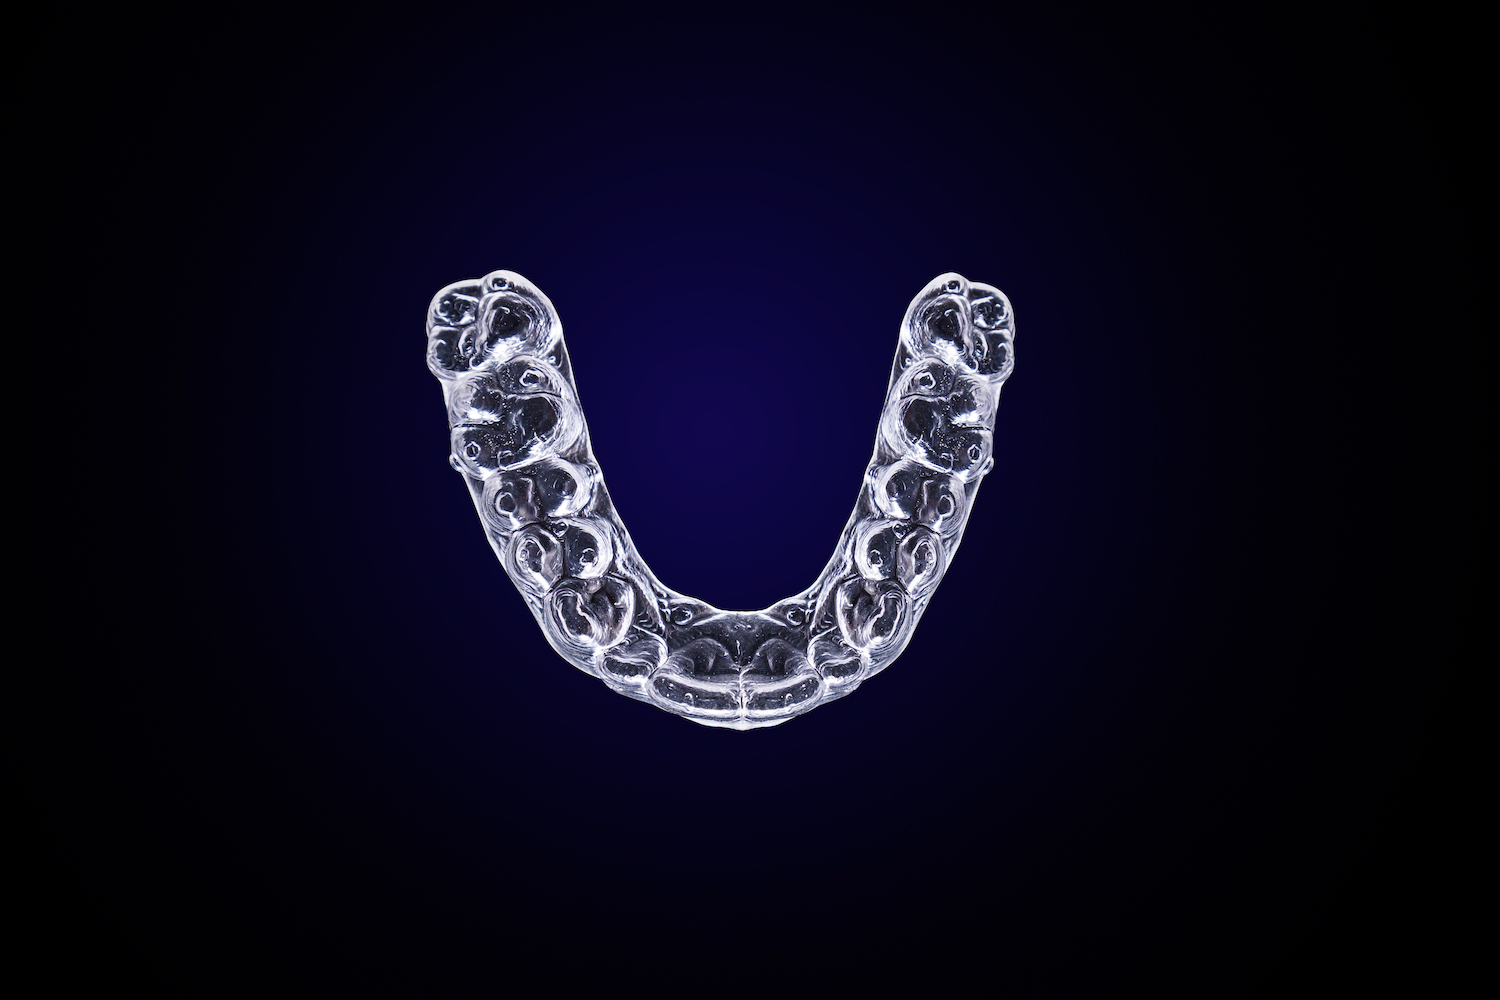 Aerial view of Invisalign Clear aligners on a navy blue background